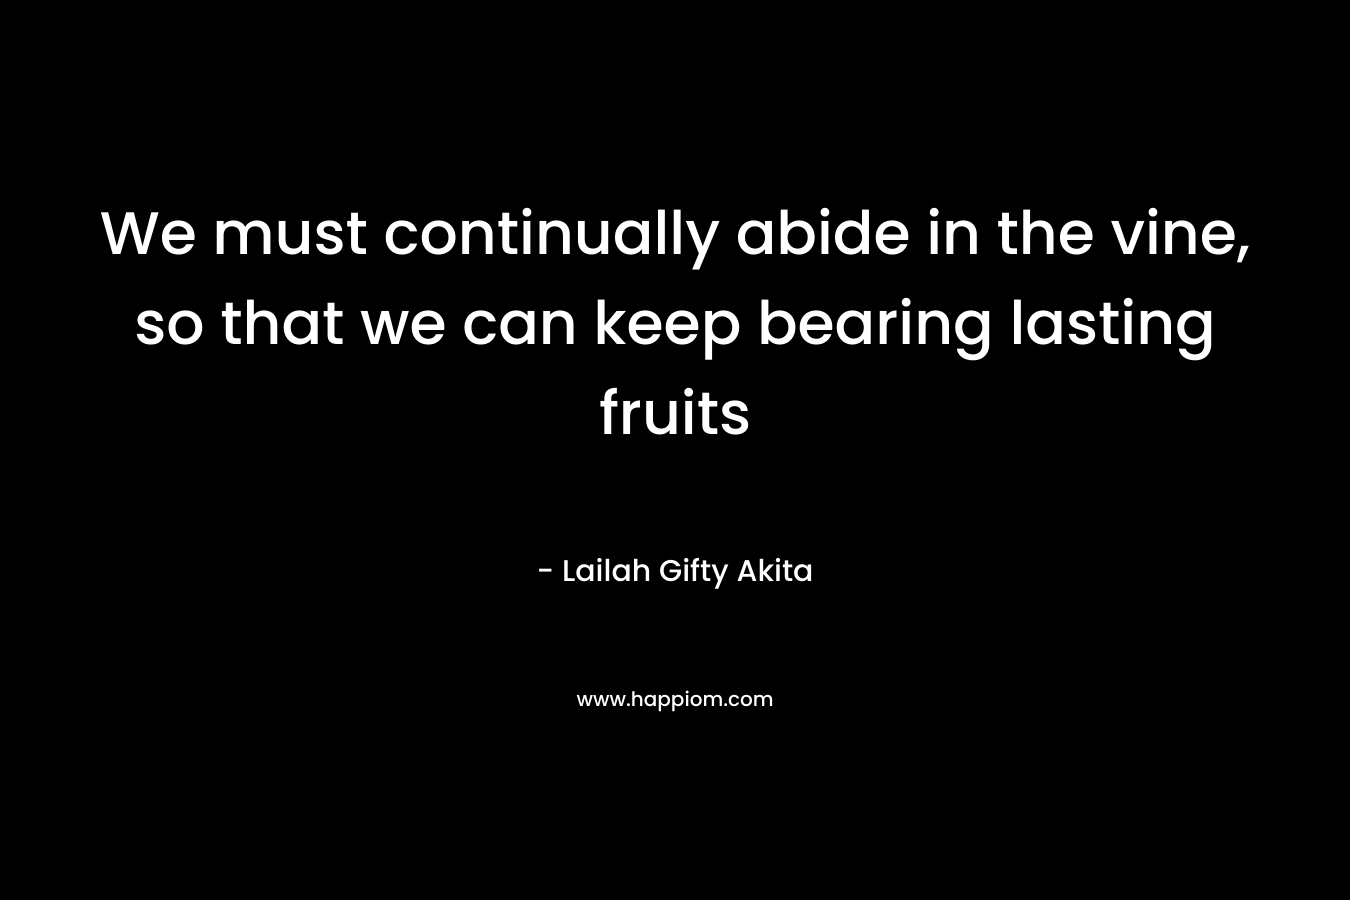 We must continually abide in the vine, so that we can keep bearing lasting fruits – Lailah Gifty Akita